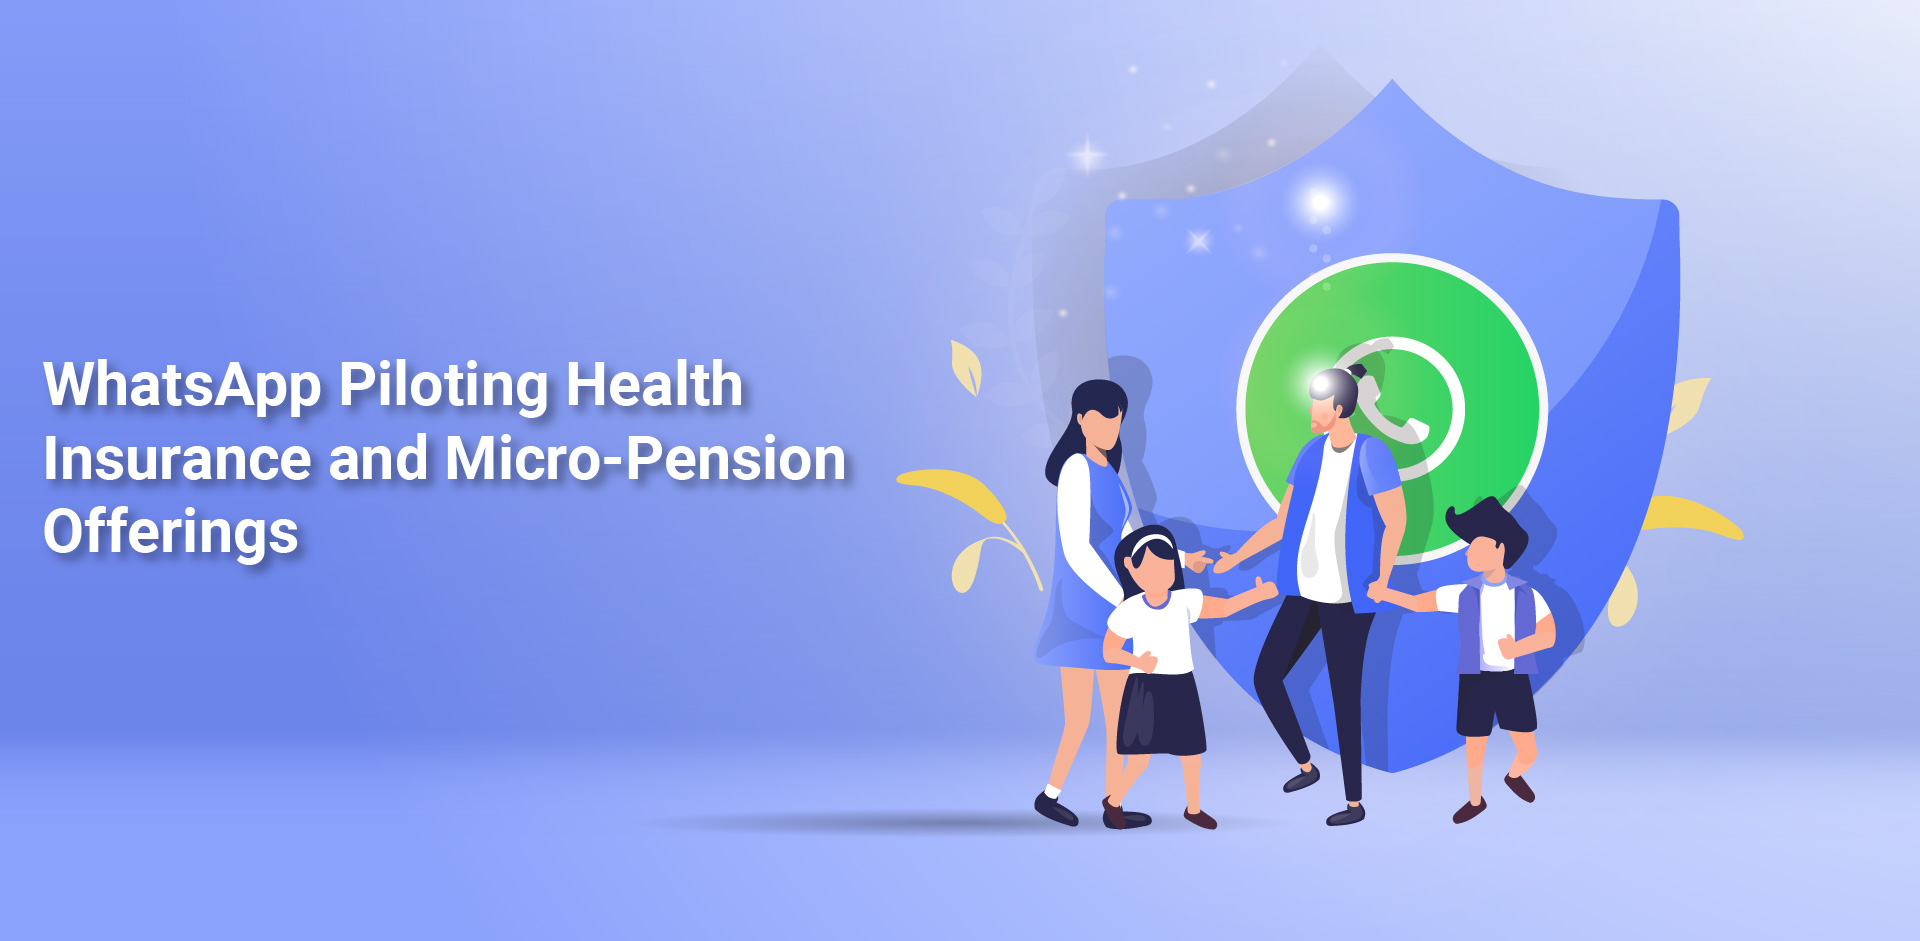 WhatsApp Piloting Health Insurance and Micro-Pension Offerings